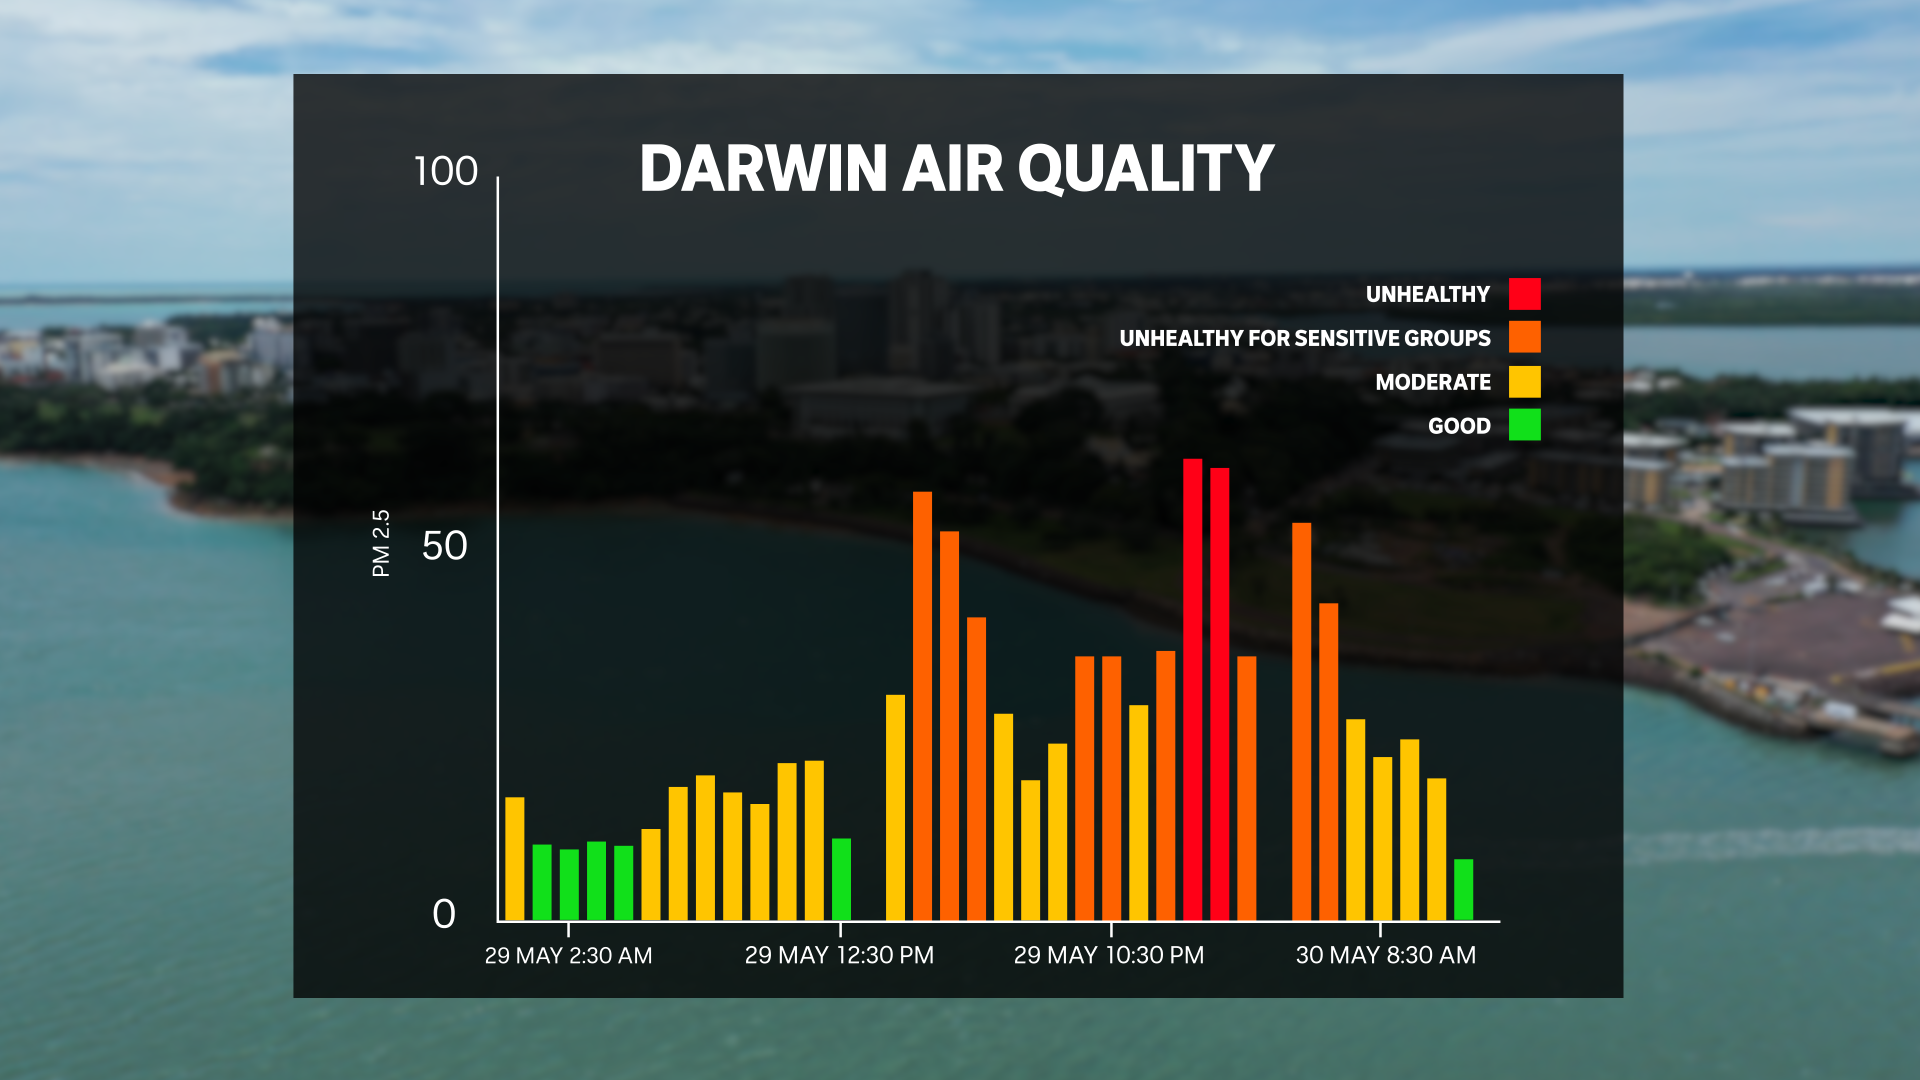 A bar graph showing the air quality of Darwin, with levels frequently unhealthy for sensitive groups and occasionally unhealthy